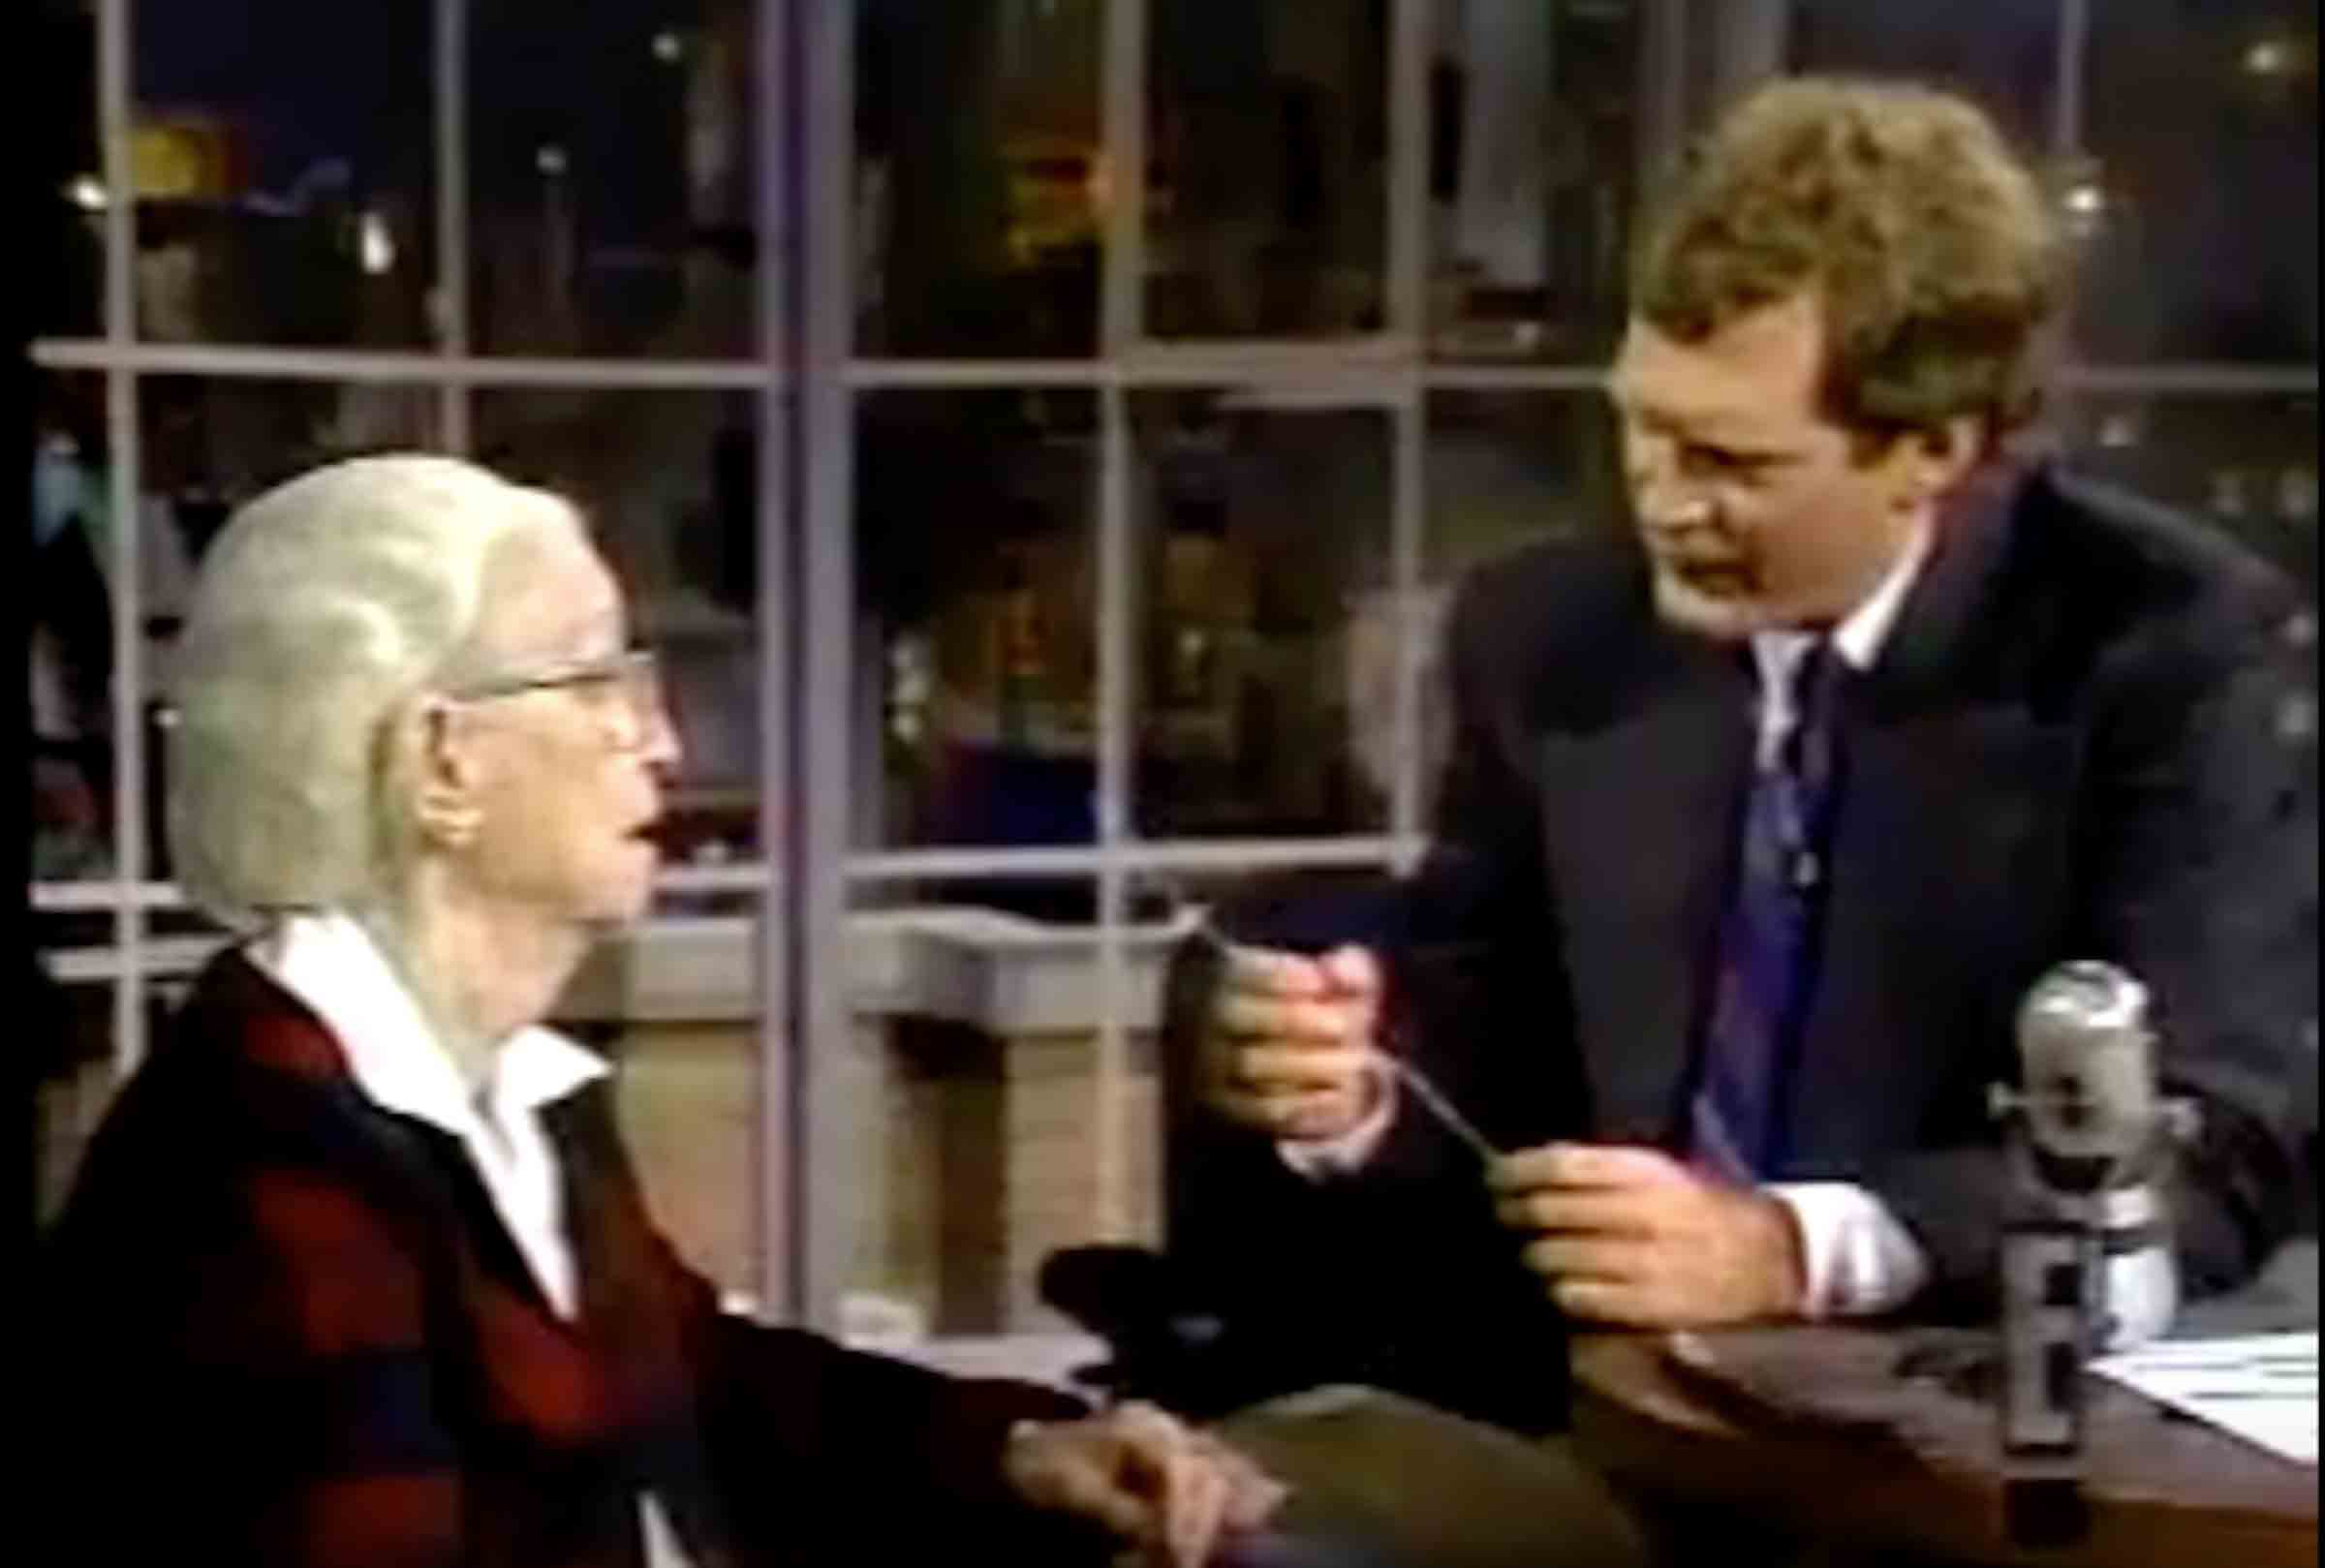 Check out Hoppers 1986 interview on the The Late Show with David Letterman!